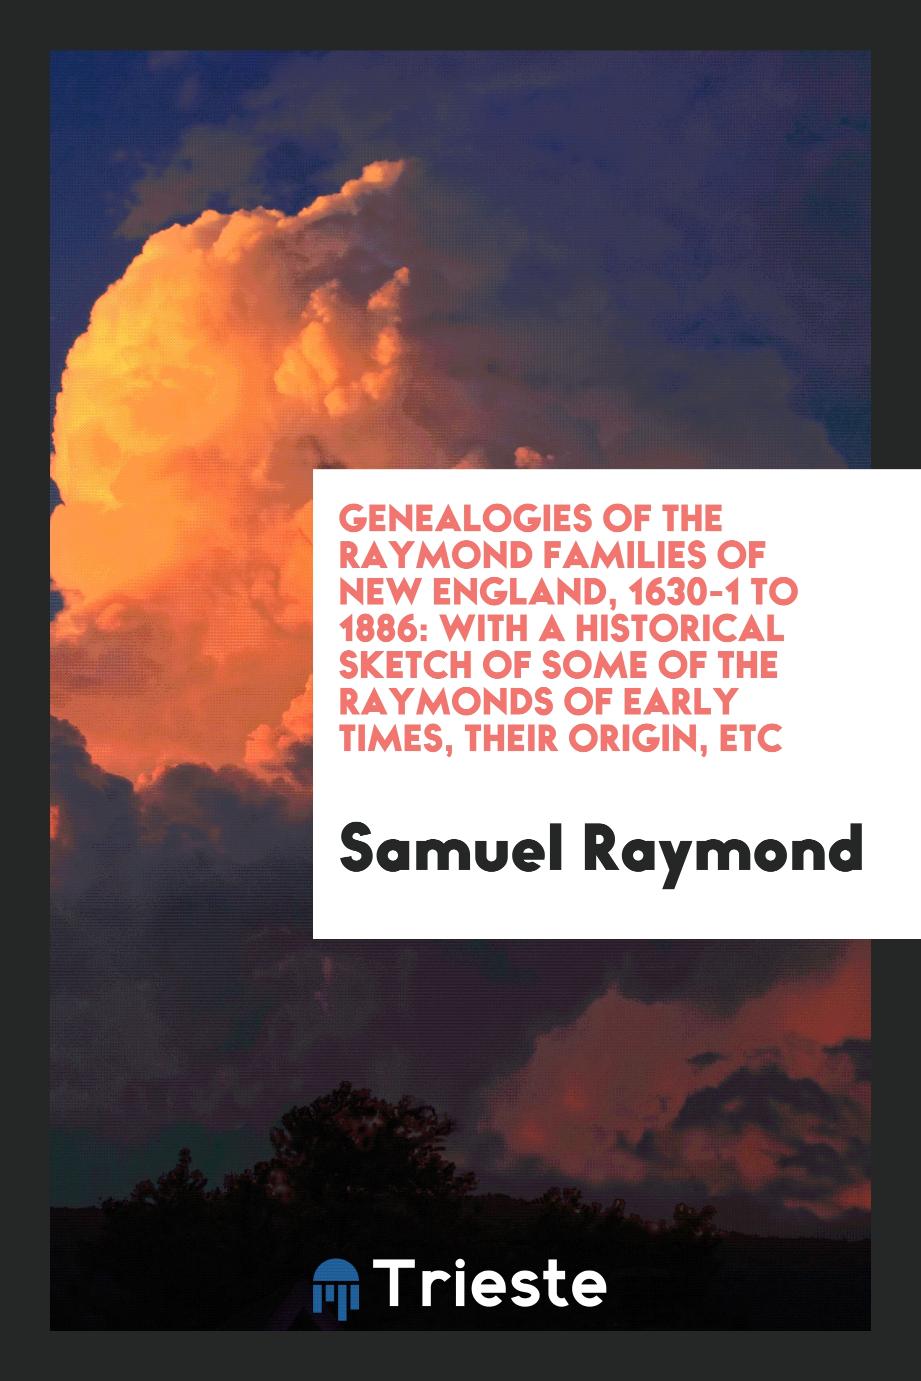 Genealogies of the Raymond Families of New England, 1630-1 to 1886: With a Historical Sketch of Some of the Raymonds of Early Times, Their Origin, etc